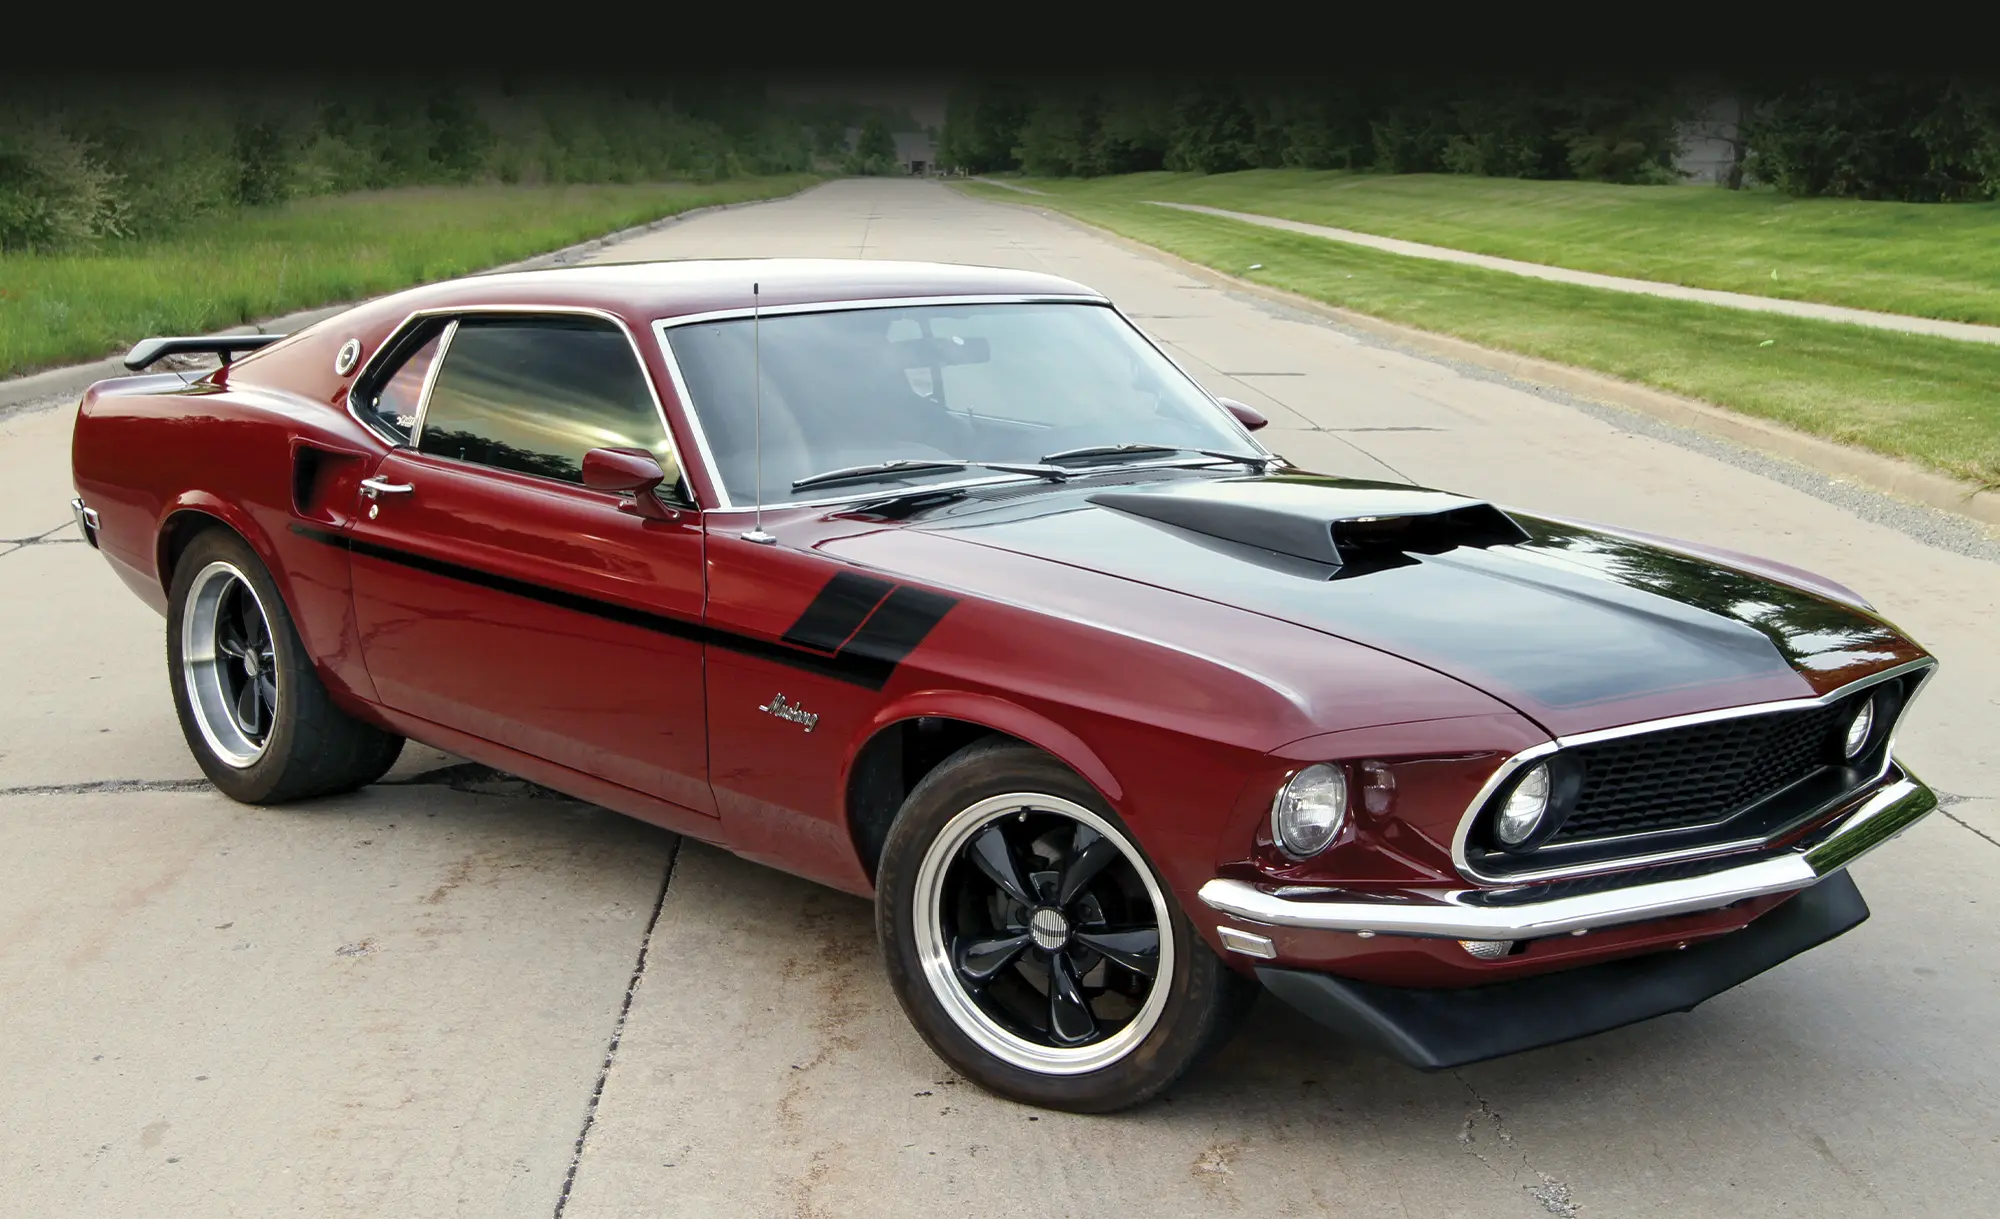 3/4 view of red and black '69 Ford Mustang